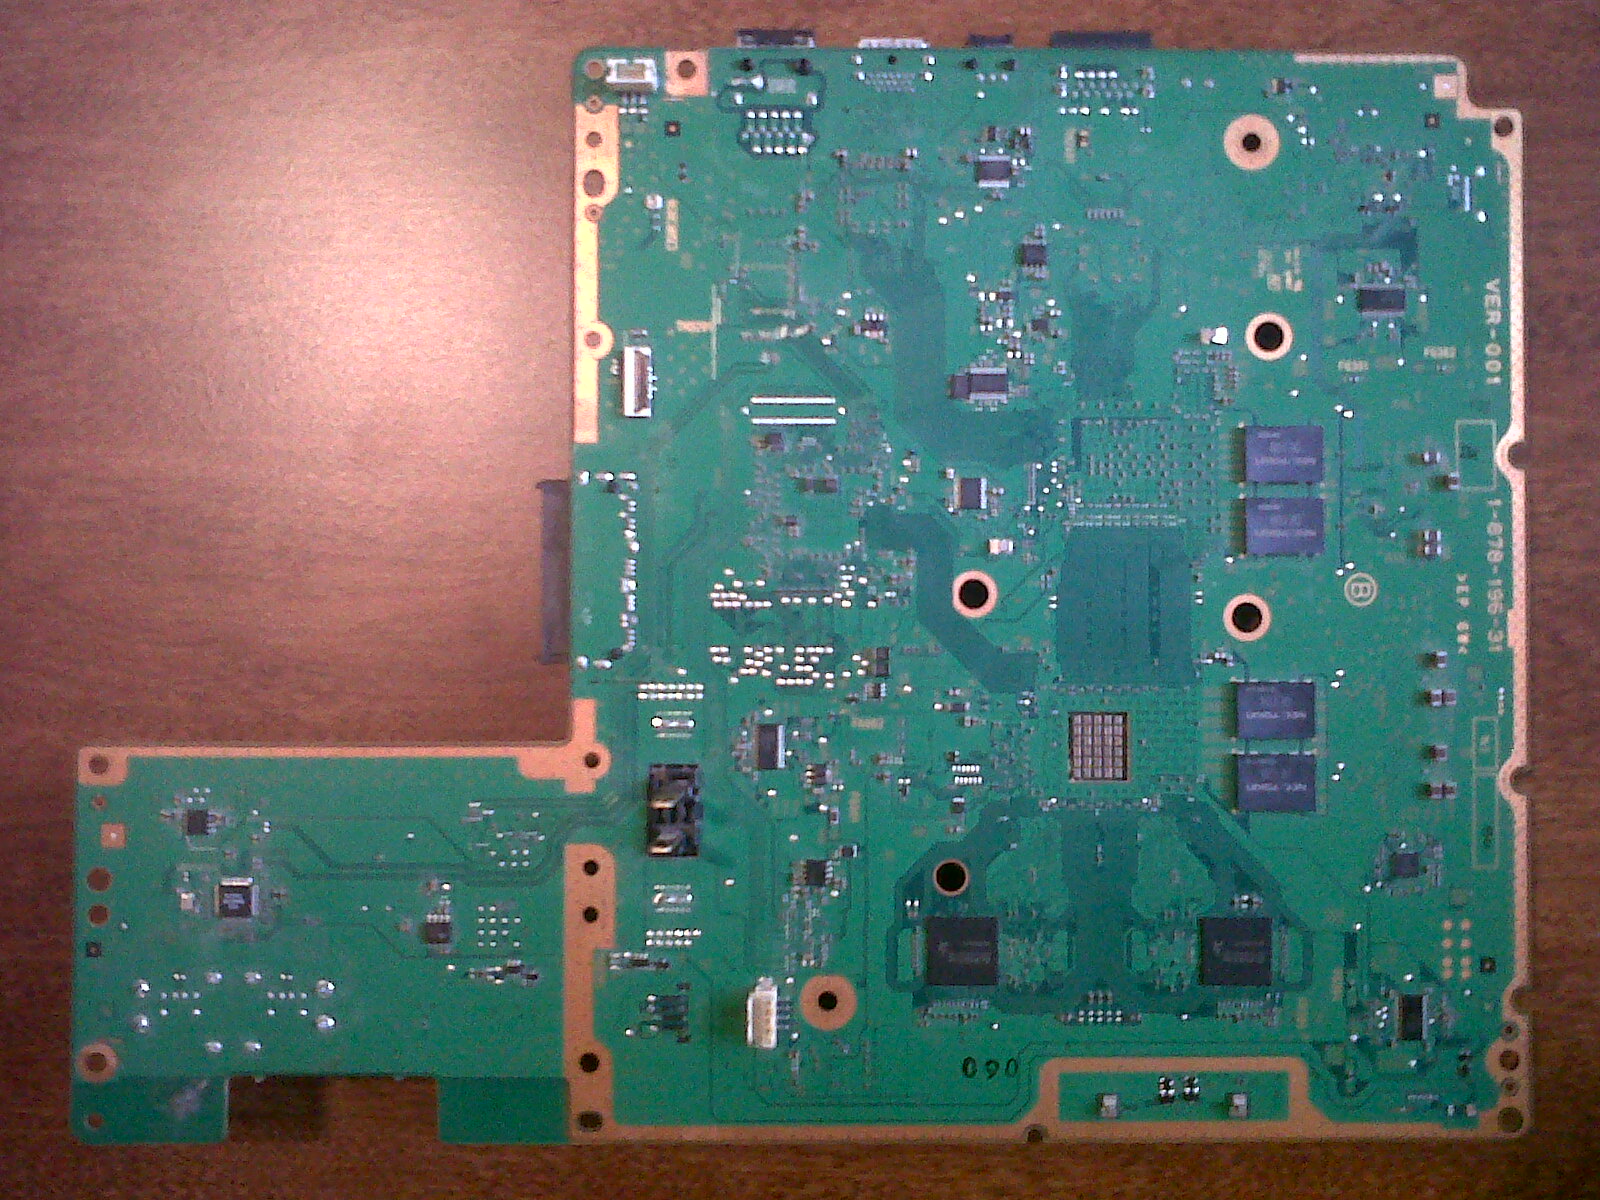 Плата ps3. Ps3 fat motherboard. PLAYSTATION 3 fat плата. Ps3 fat cechq00. Материнской платы ps3 phat ver 001 CECHL 08.